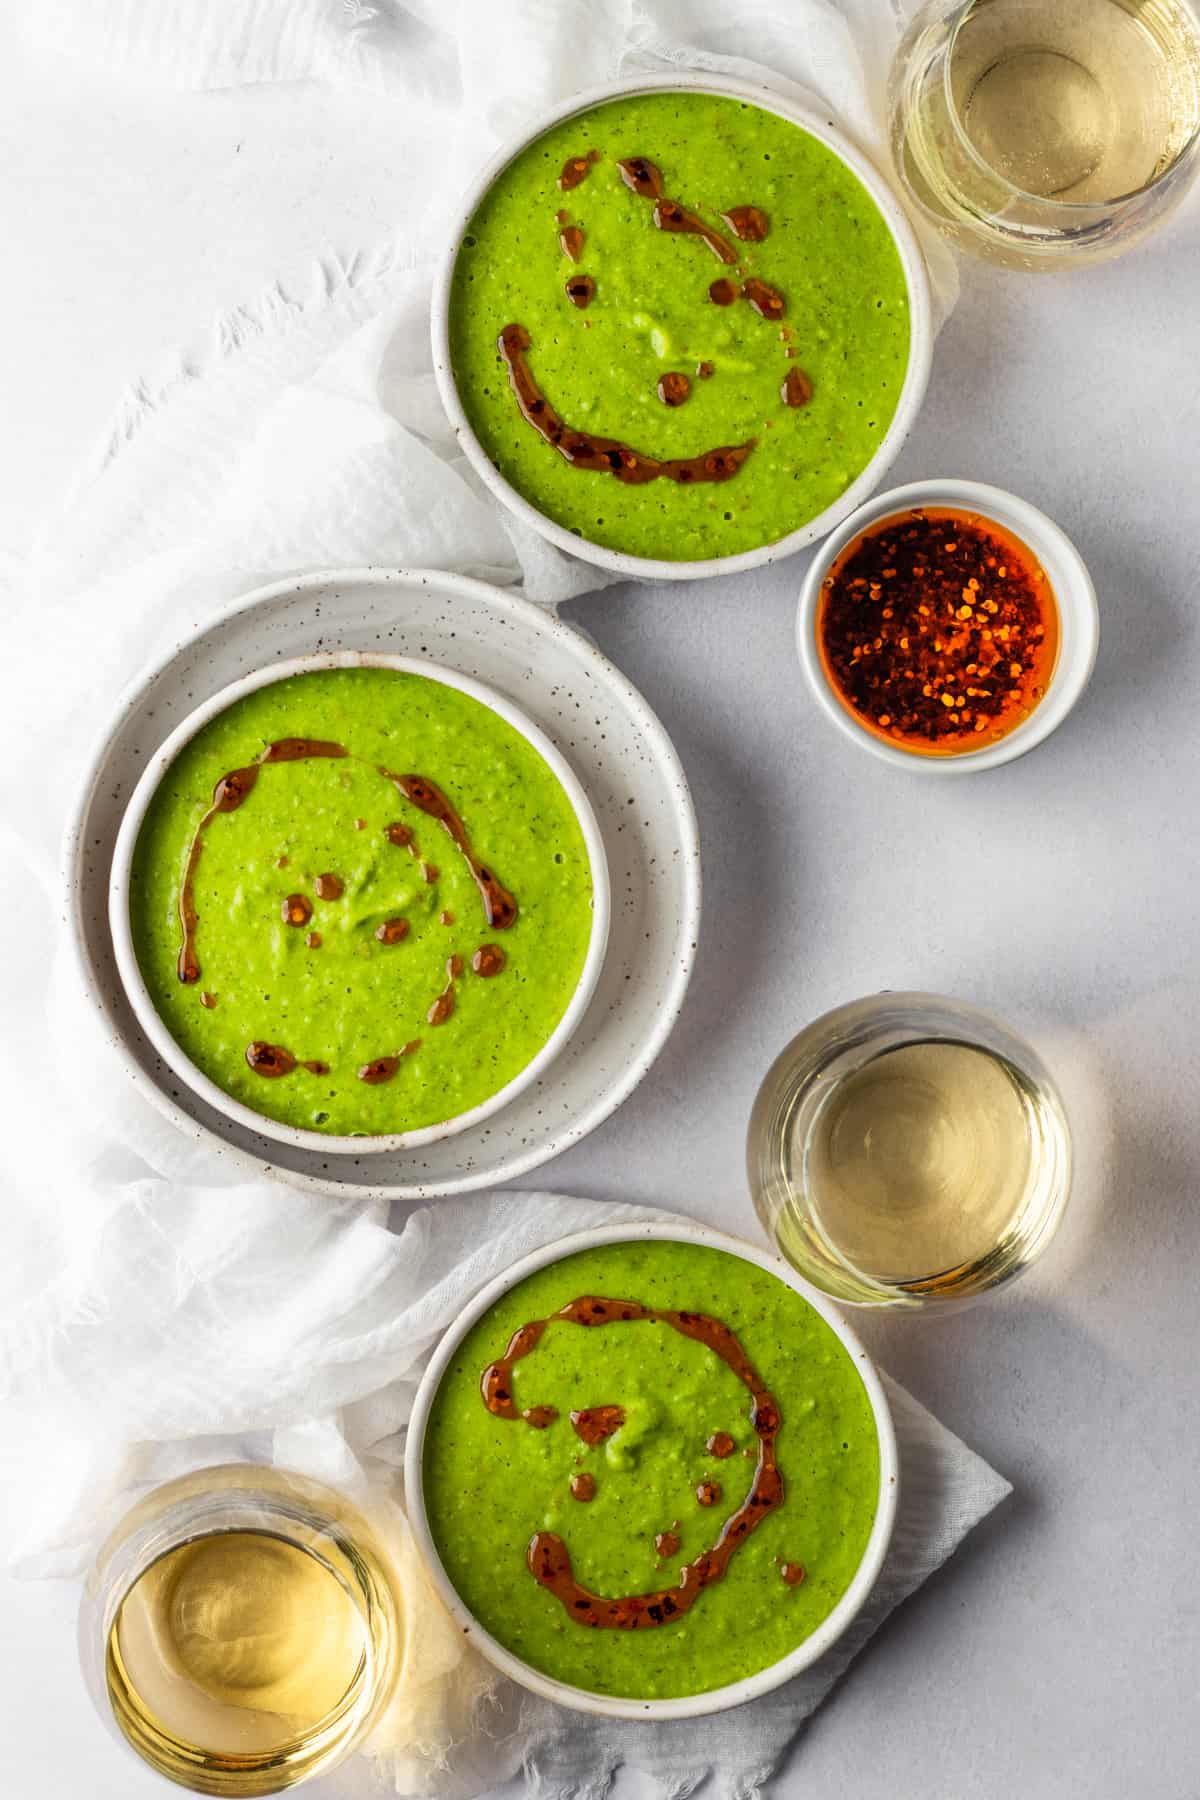 Three bowls of creamy green pea soup with garlic chili oil drizzled on top.